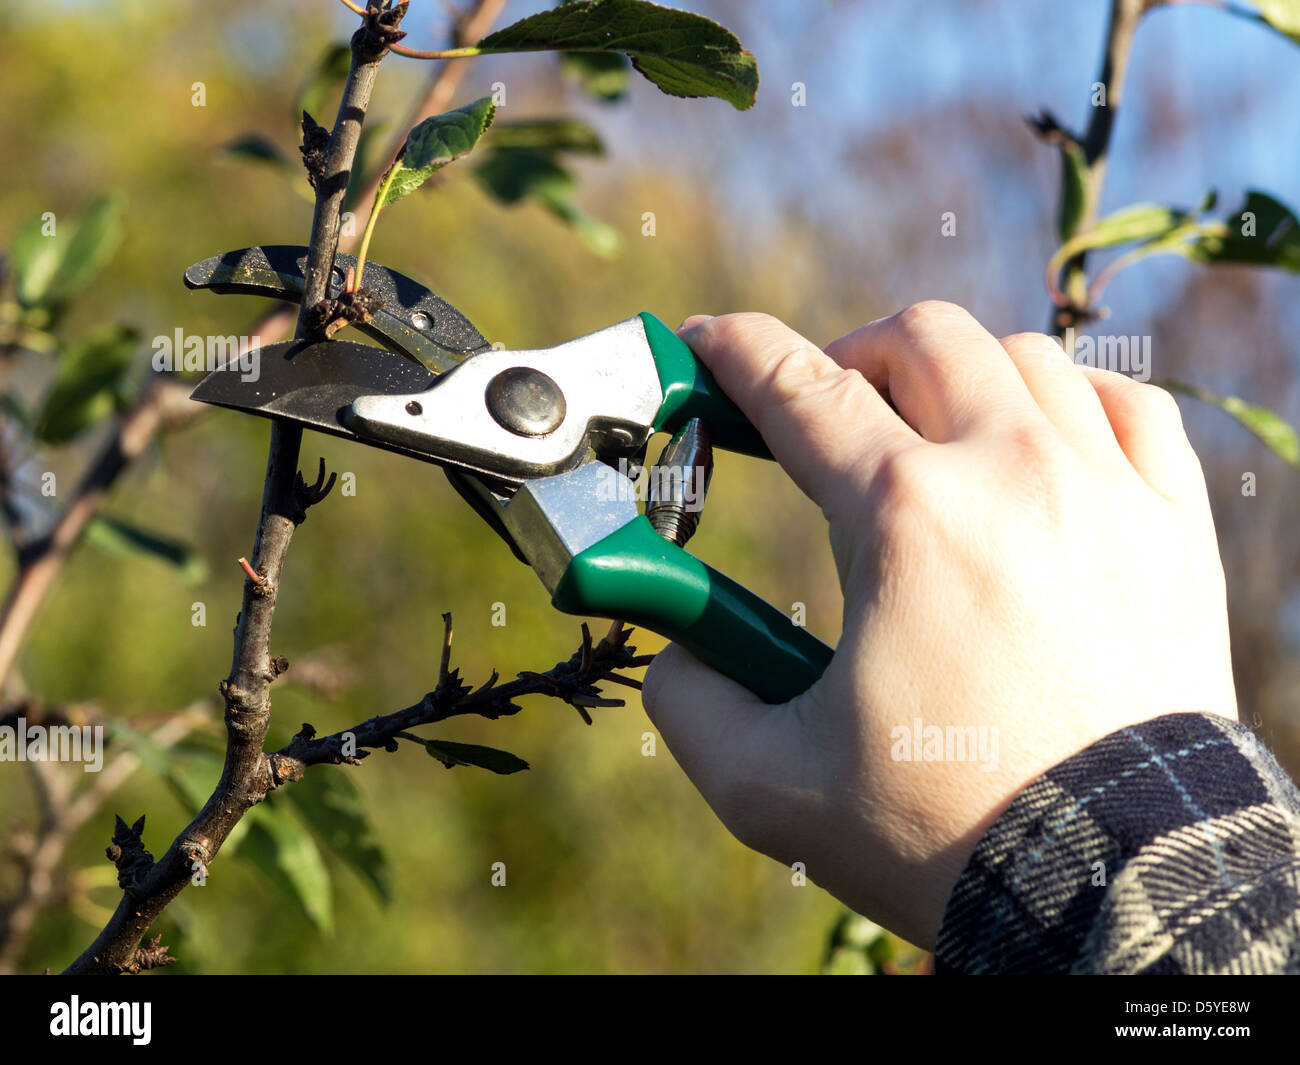 pruning apple tree in the spring Stock Photo